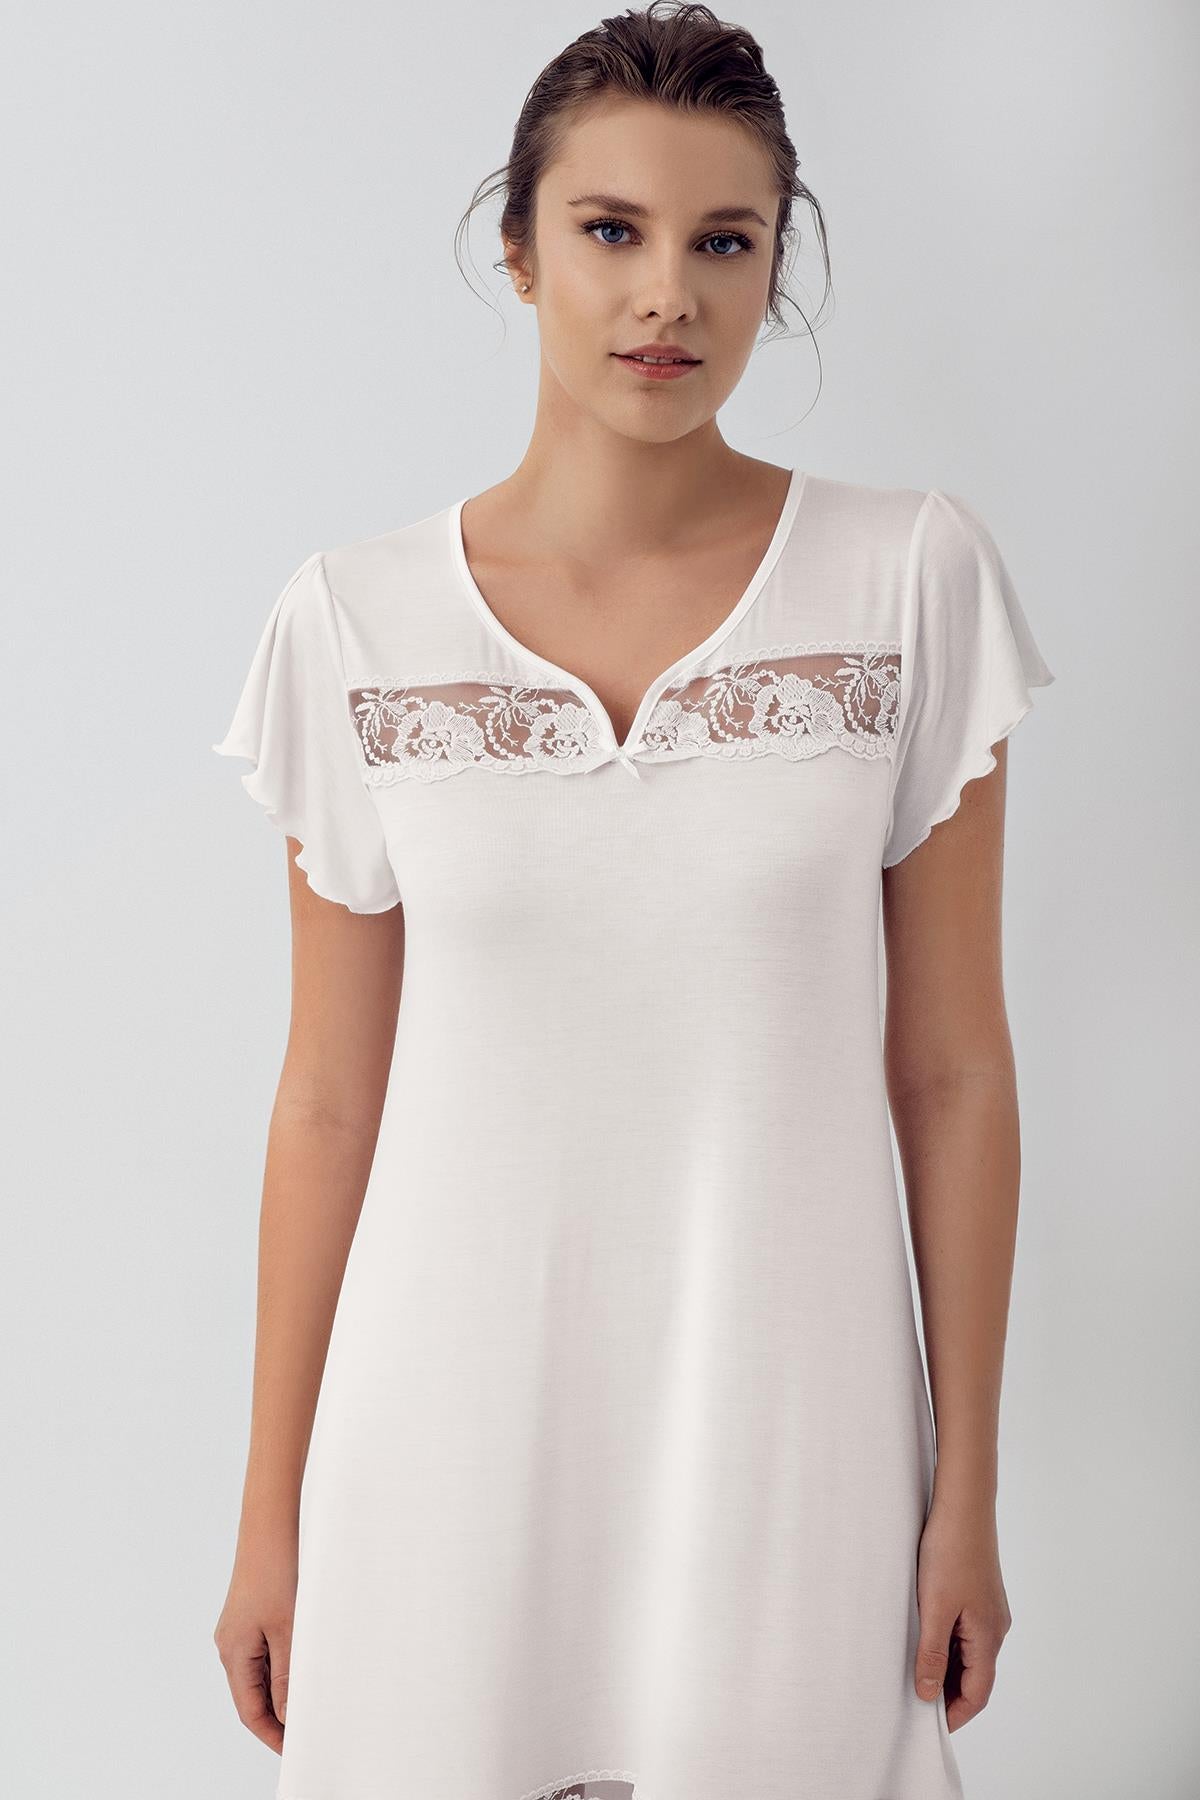 Lace Short Sleeve Flexible Viscose Nightgown 16110